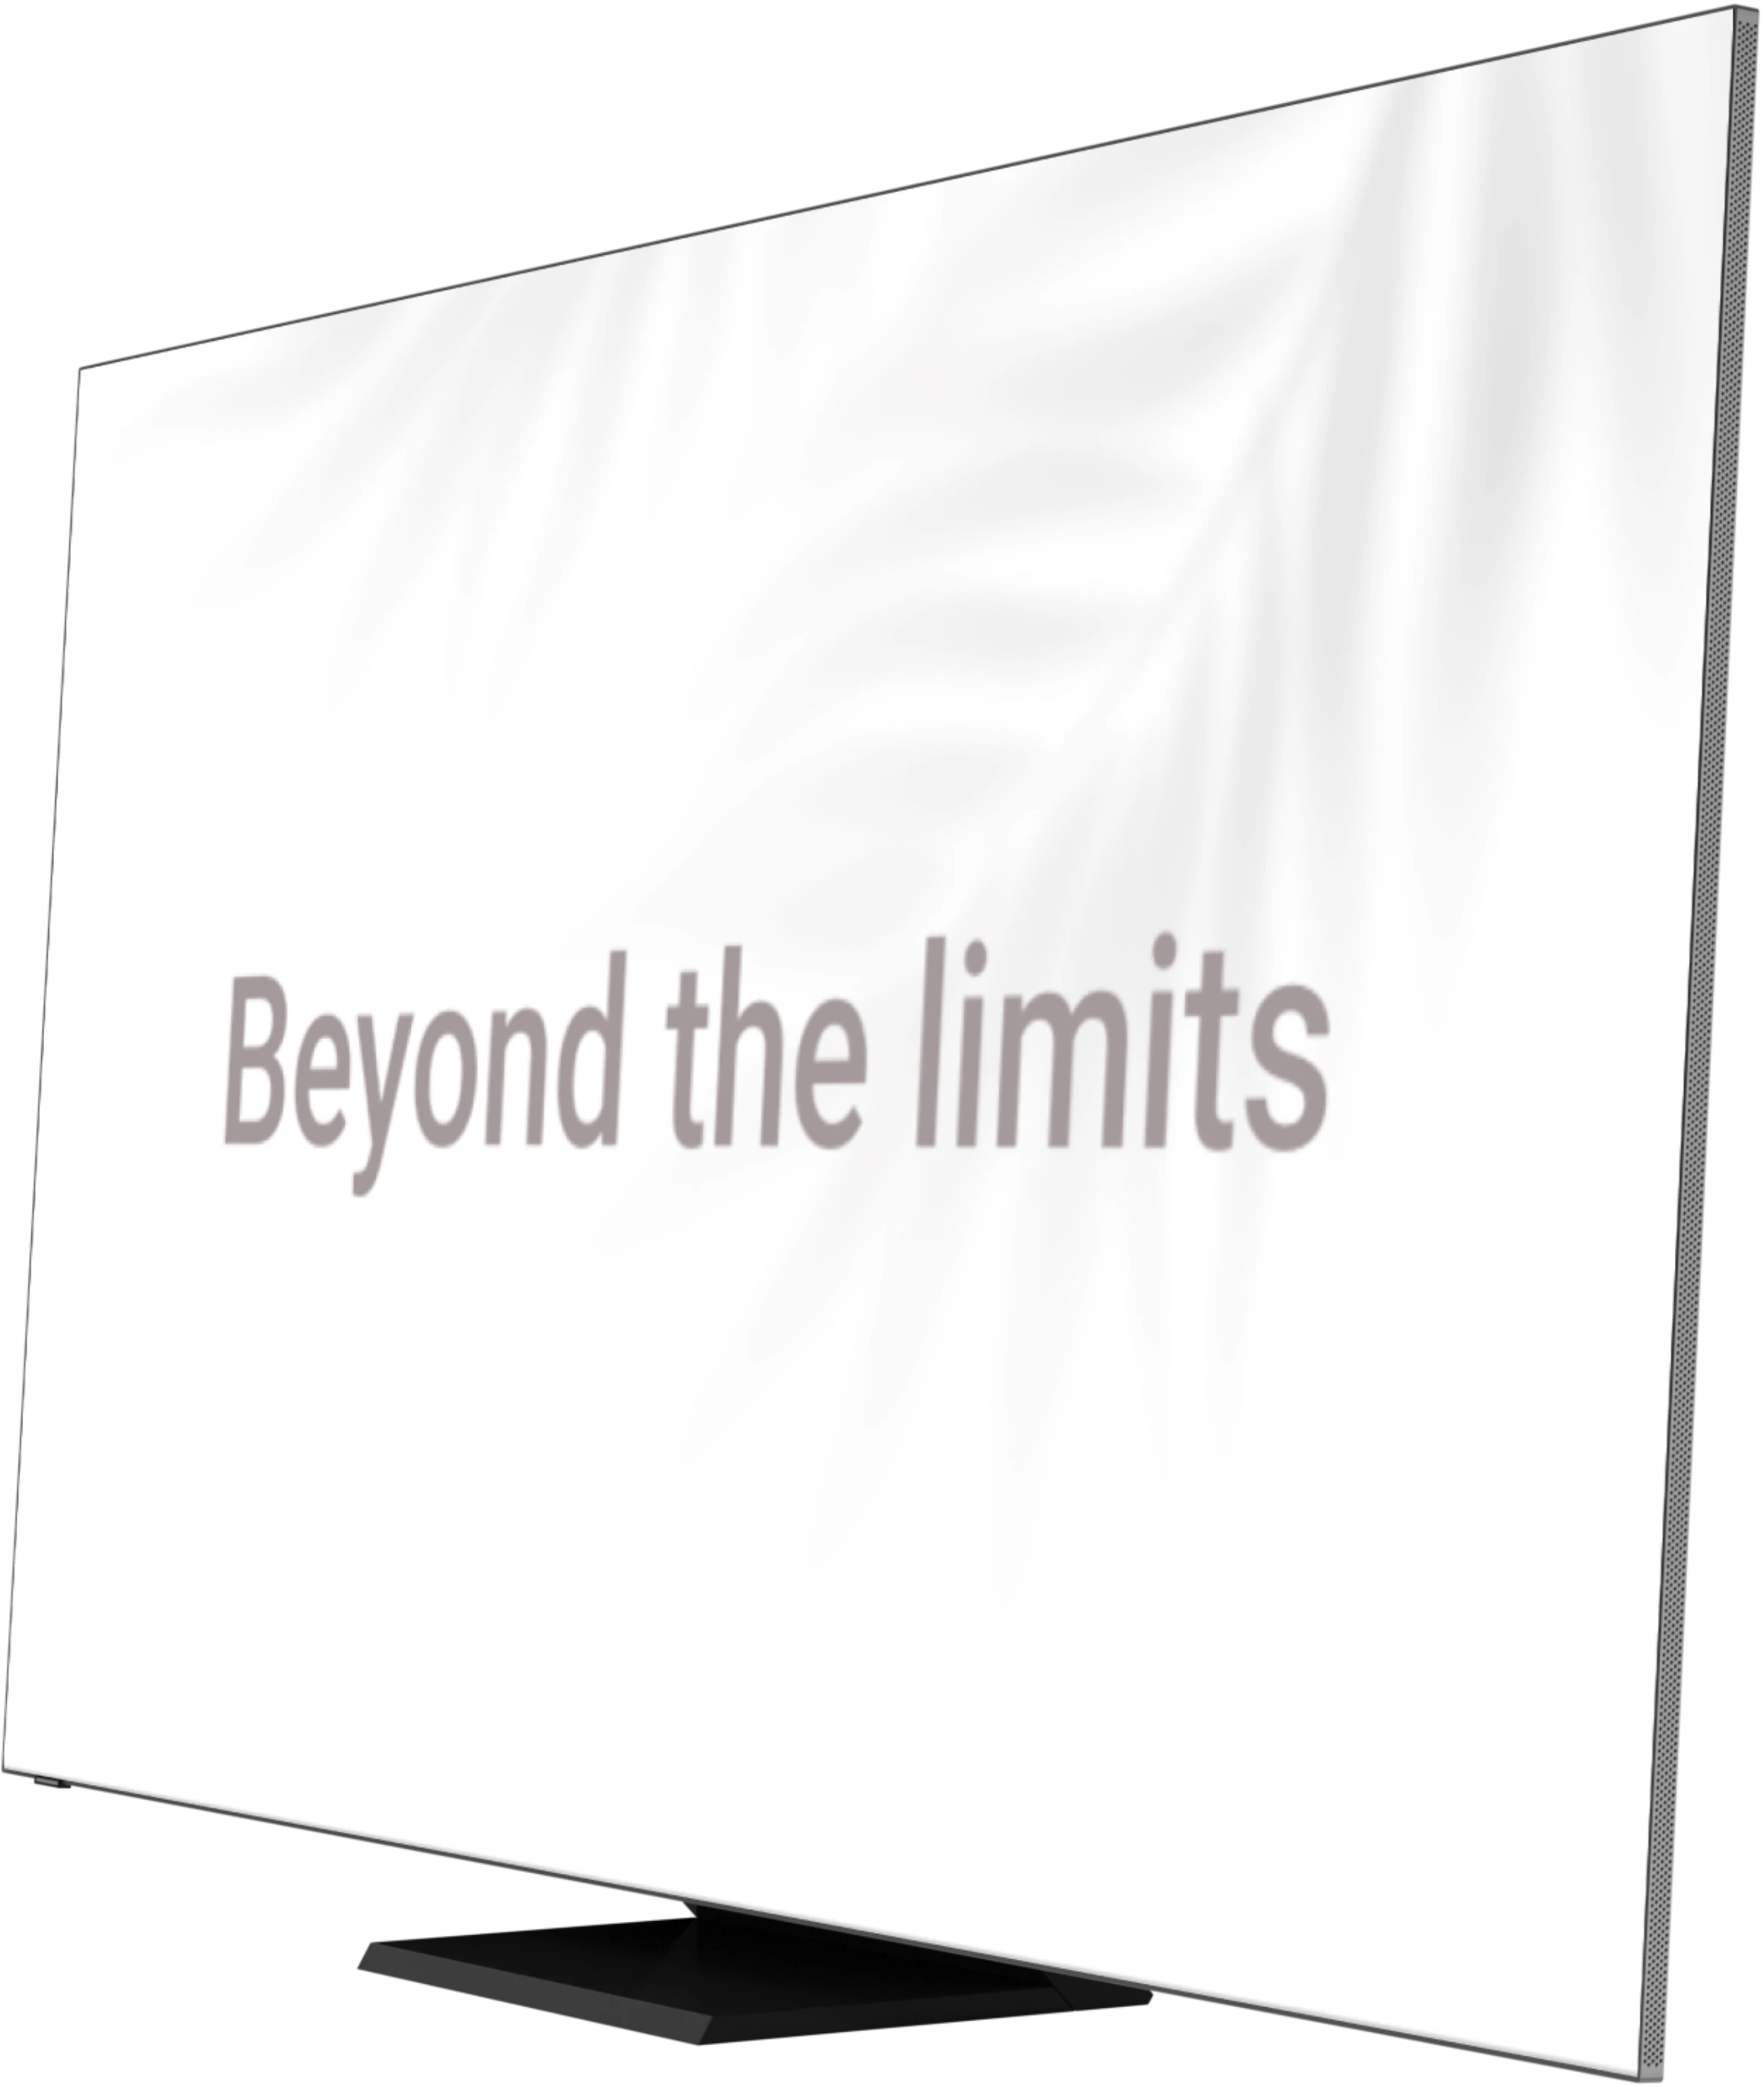 digital signage screen displaying content Beyond the limits. 